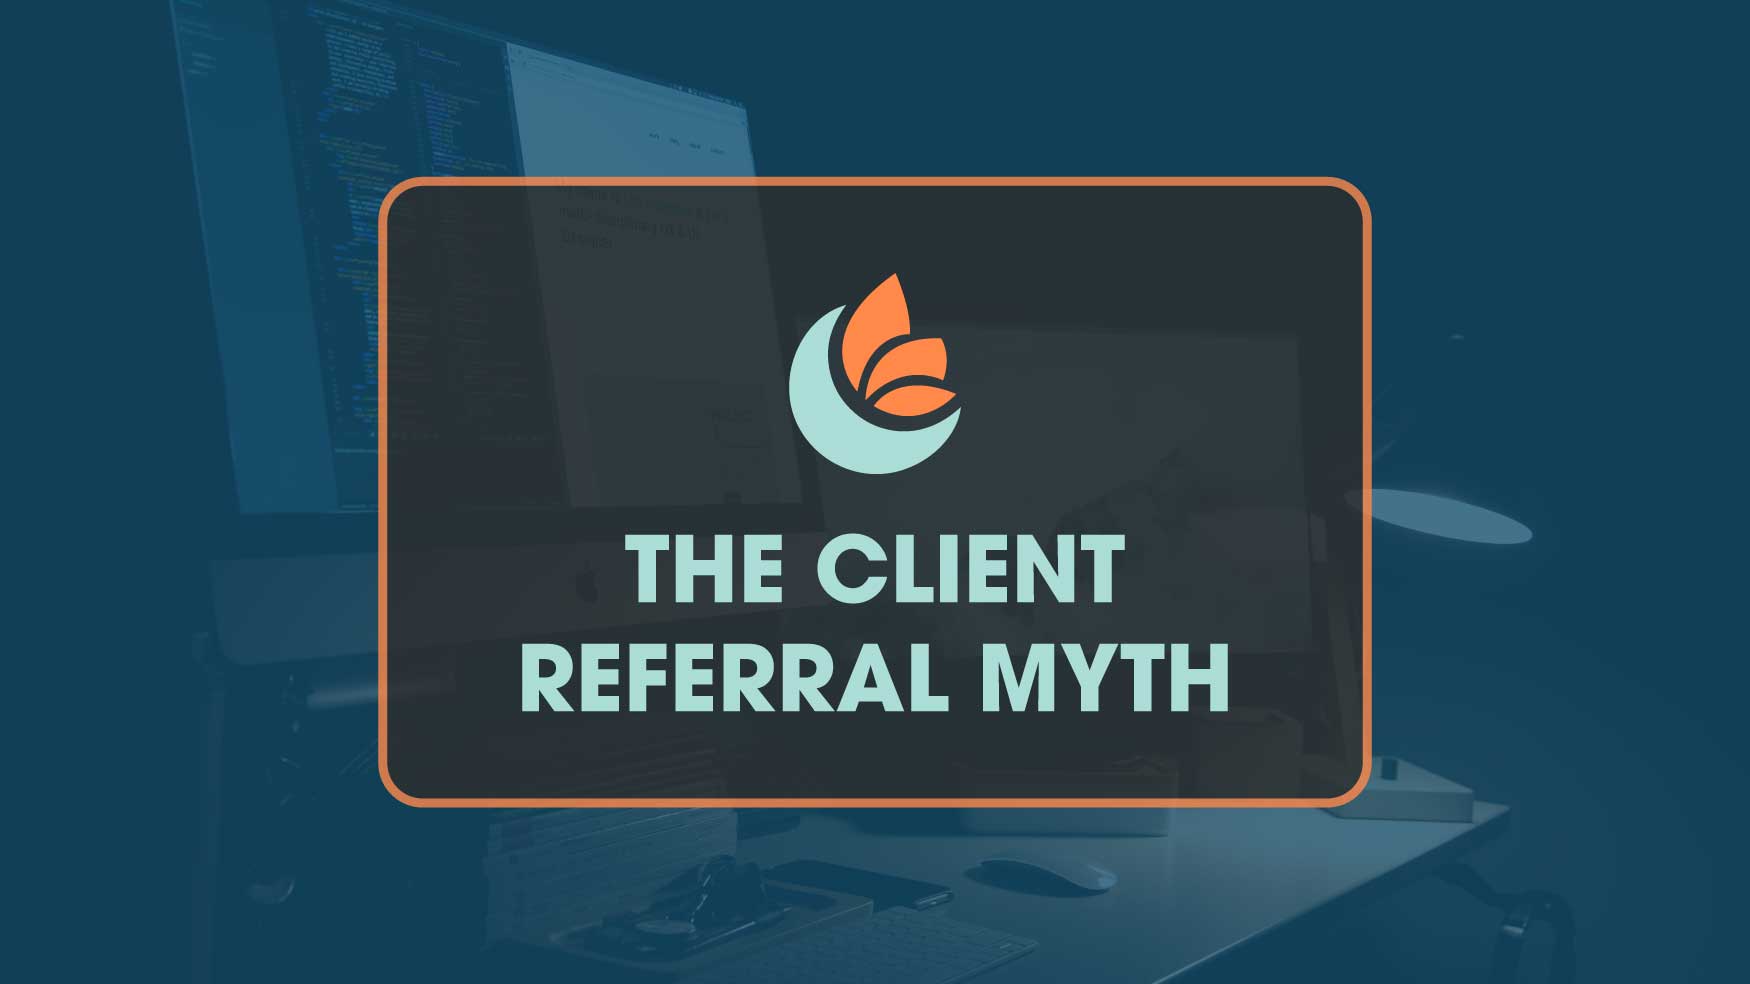 The Client Referral Myth